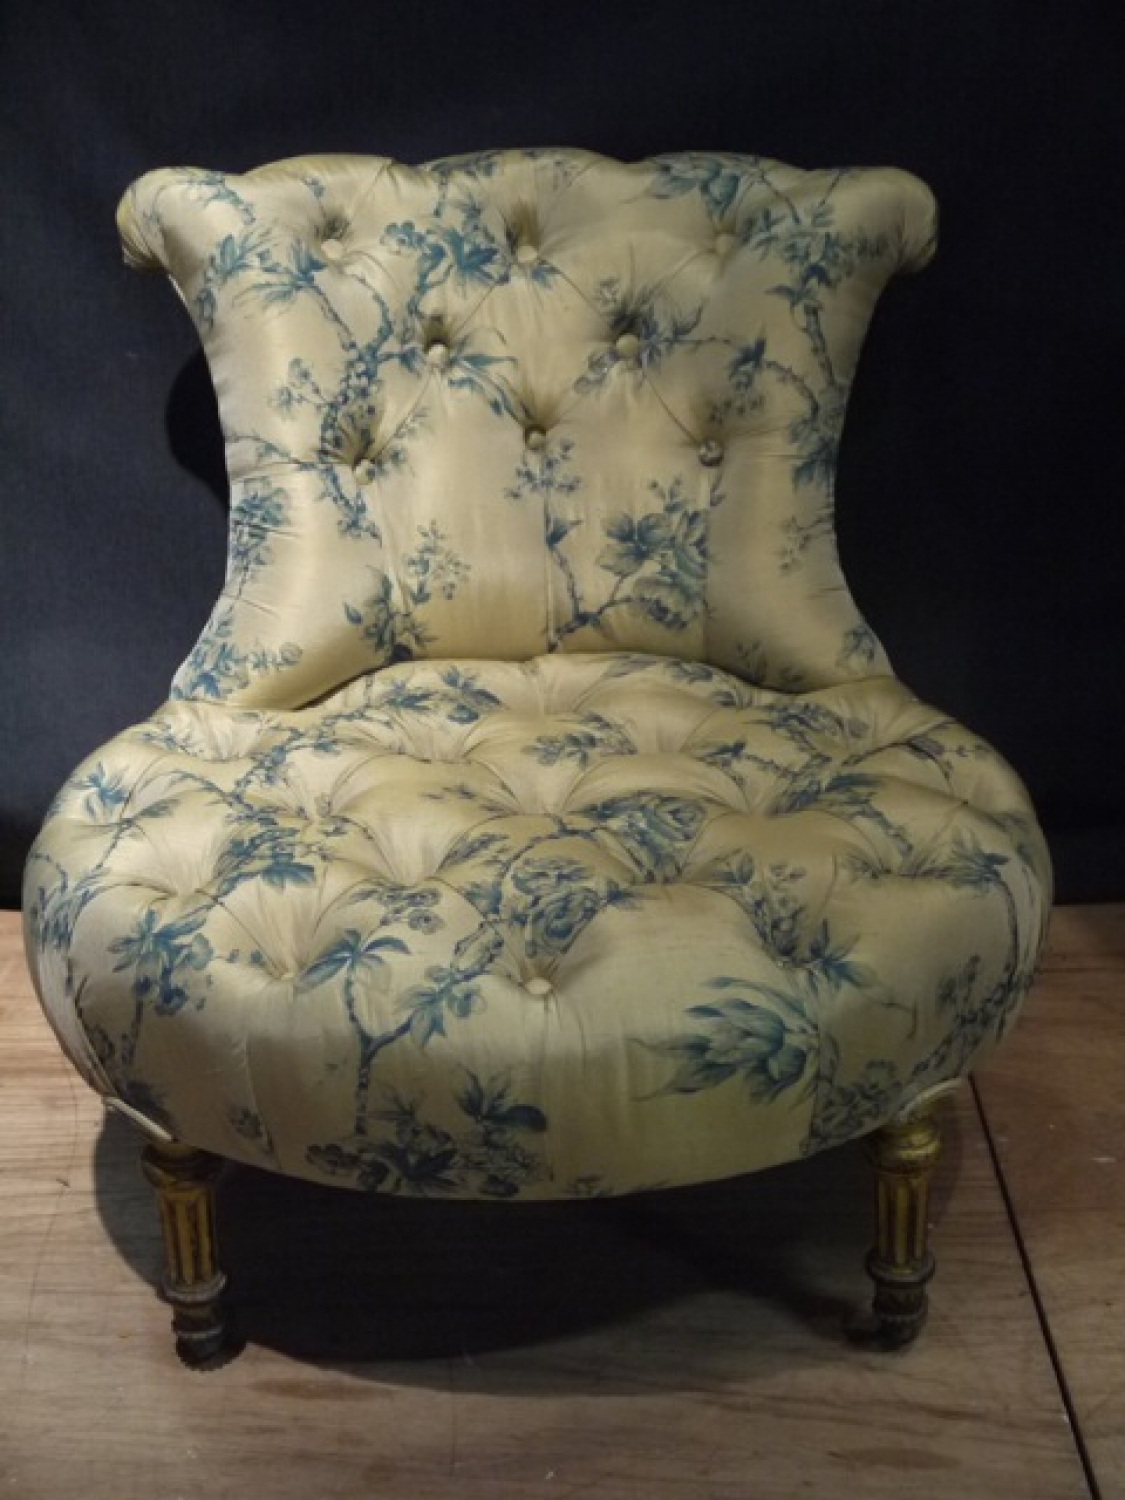 Silk covered low chair